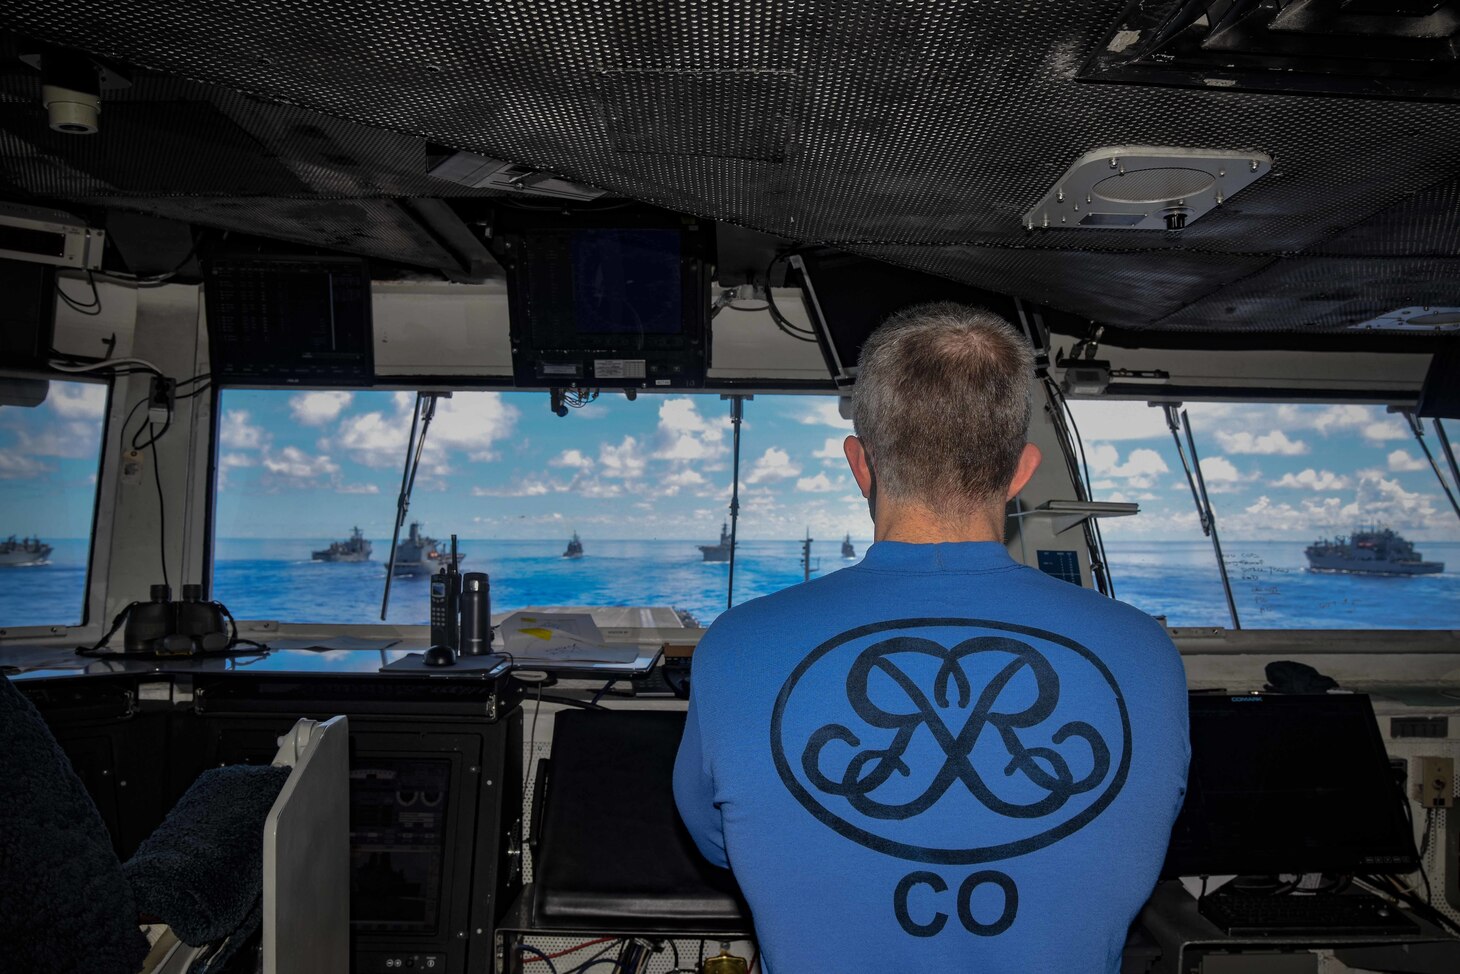 Capt. Patrick Hannifin, commanding officer of the Navy�s only forward-deployed aircraft carrier USS Ronald Reagan (CVN 76), observes a formation for a photo exercise in support of Valiant Shield 2020.